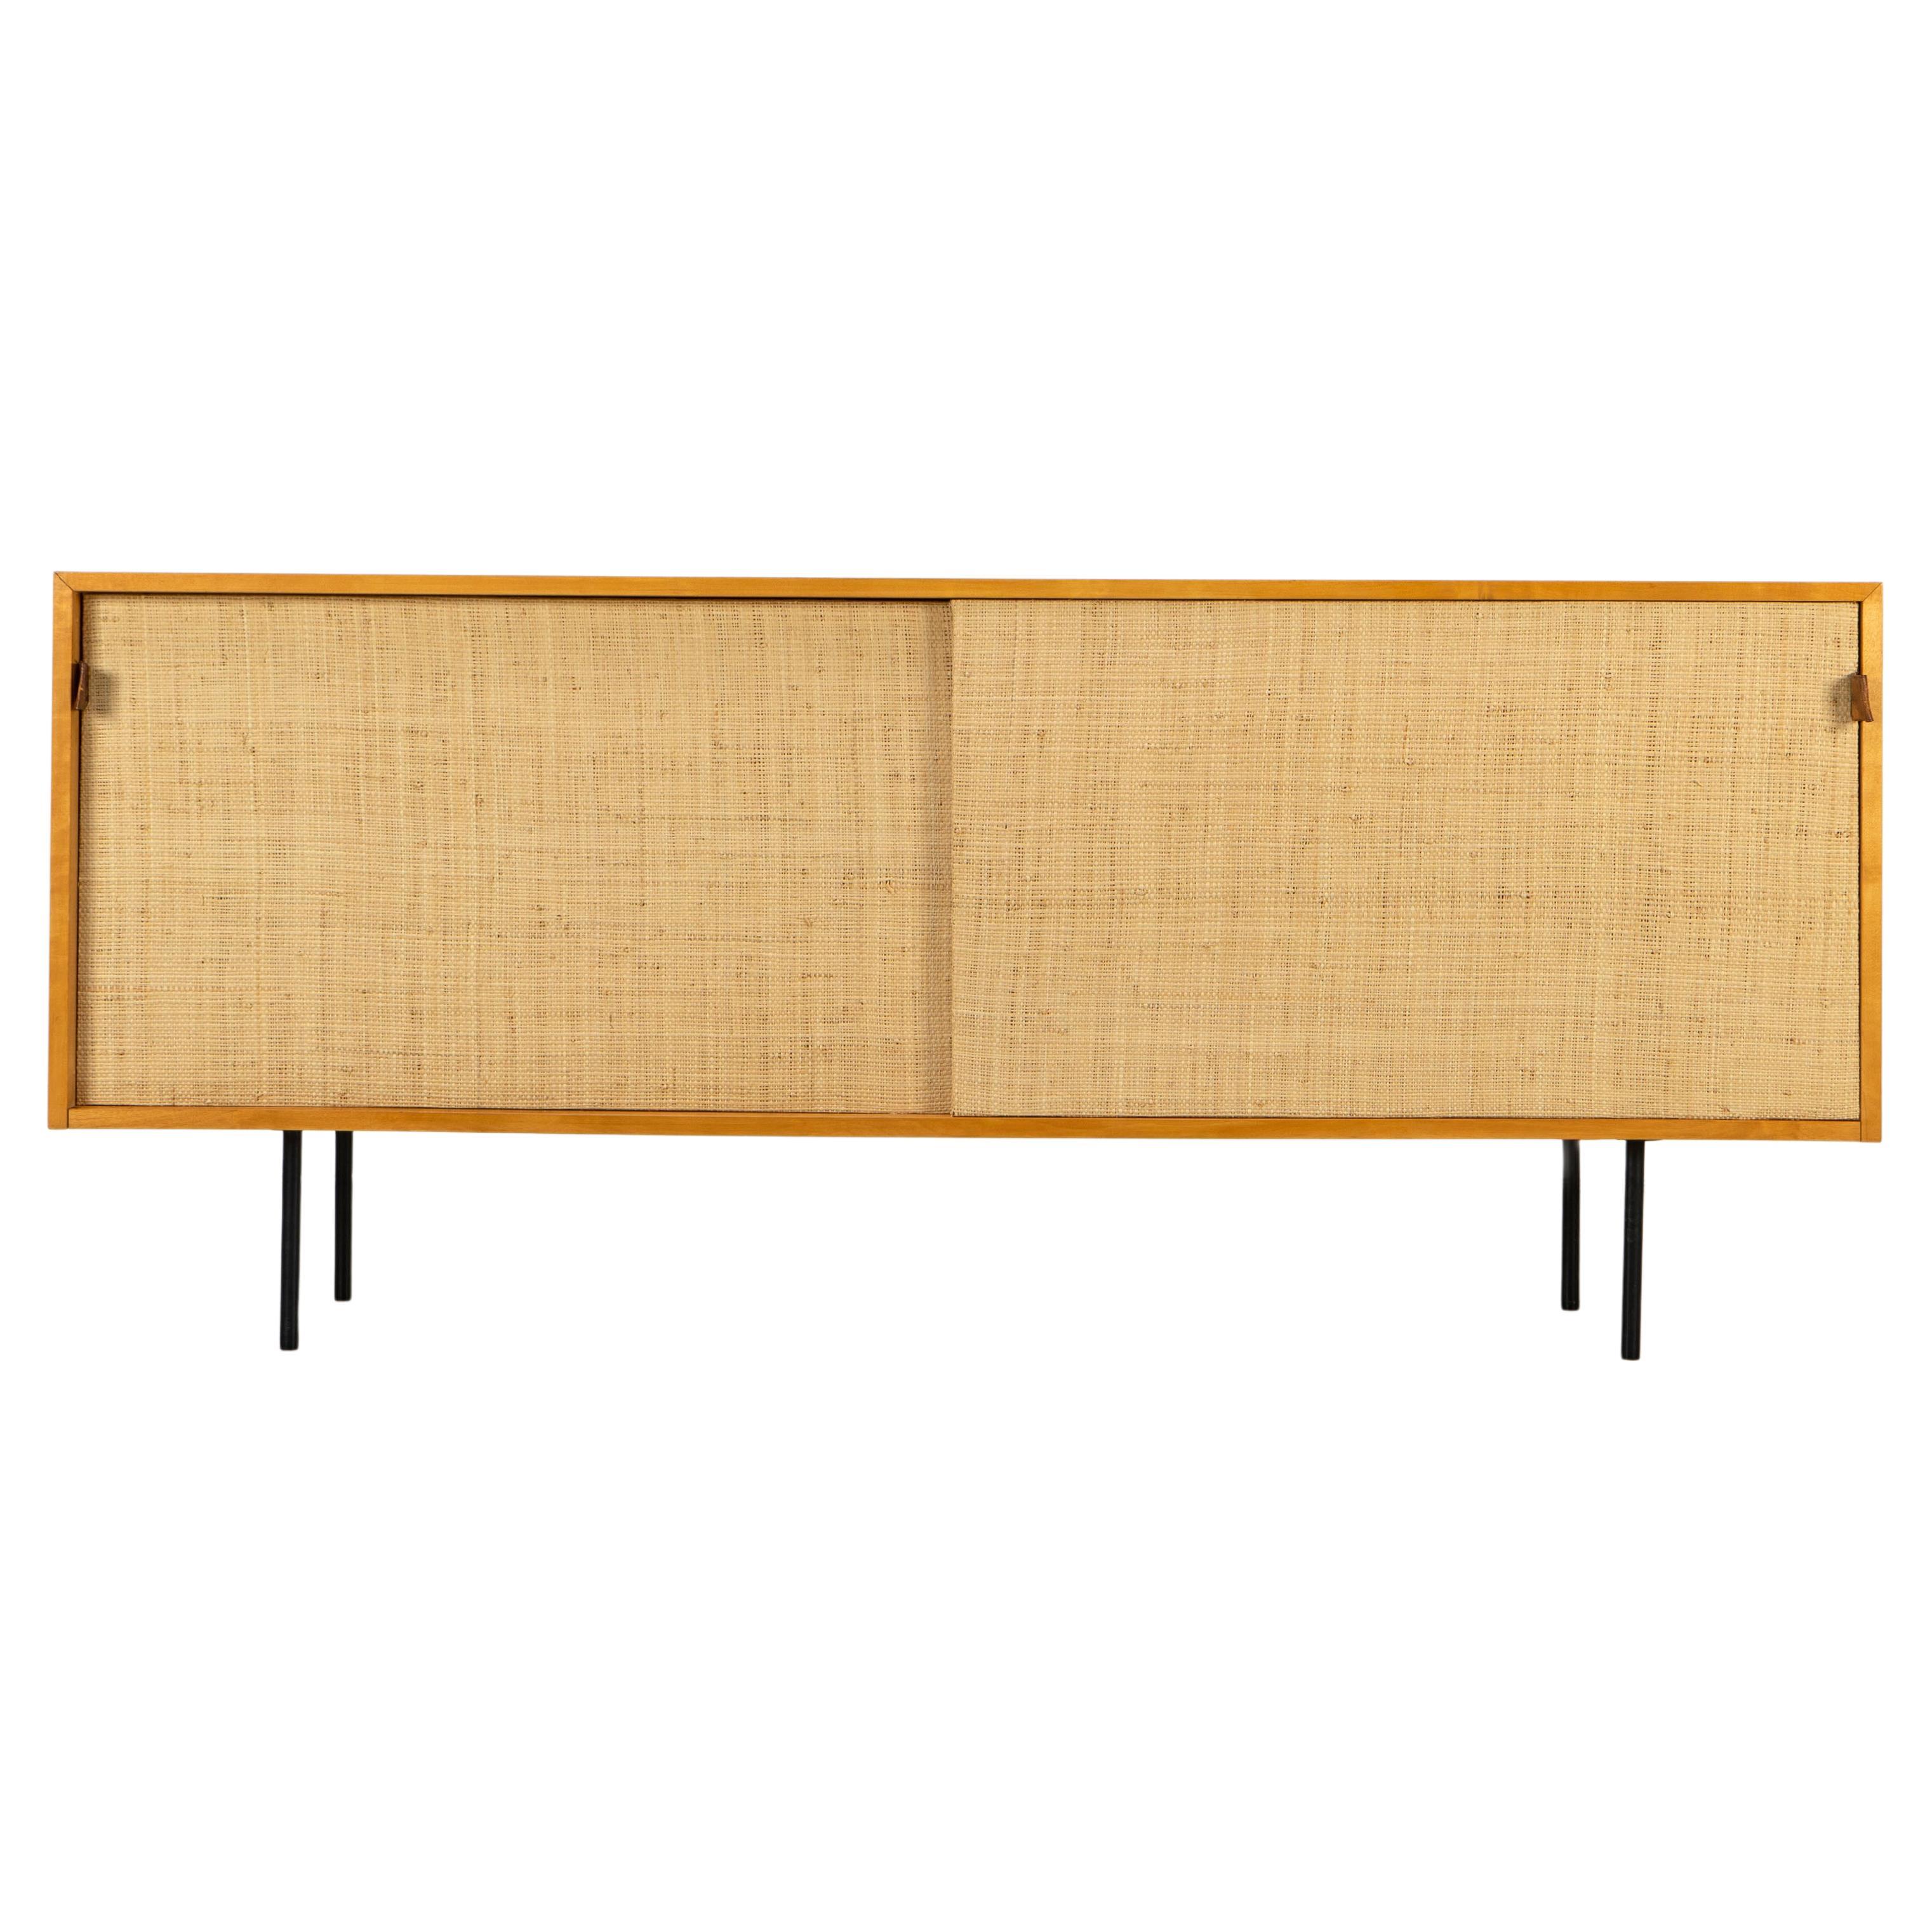 Mid-Century Modern Sideboard 116 by Florence Knoll for Knoll International, 1952